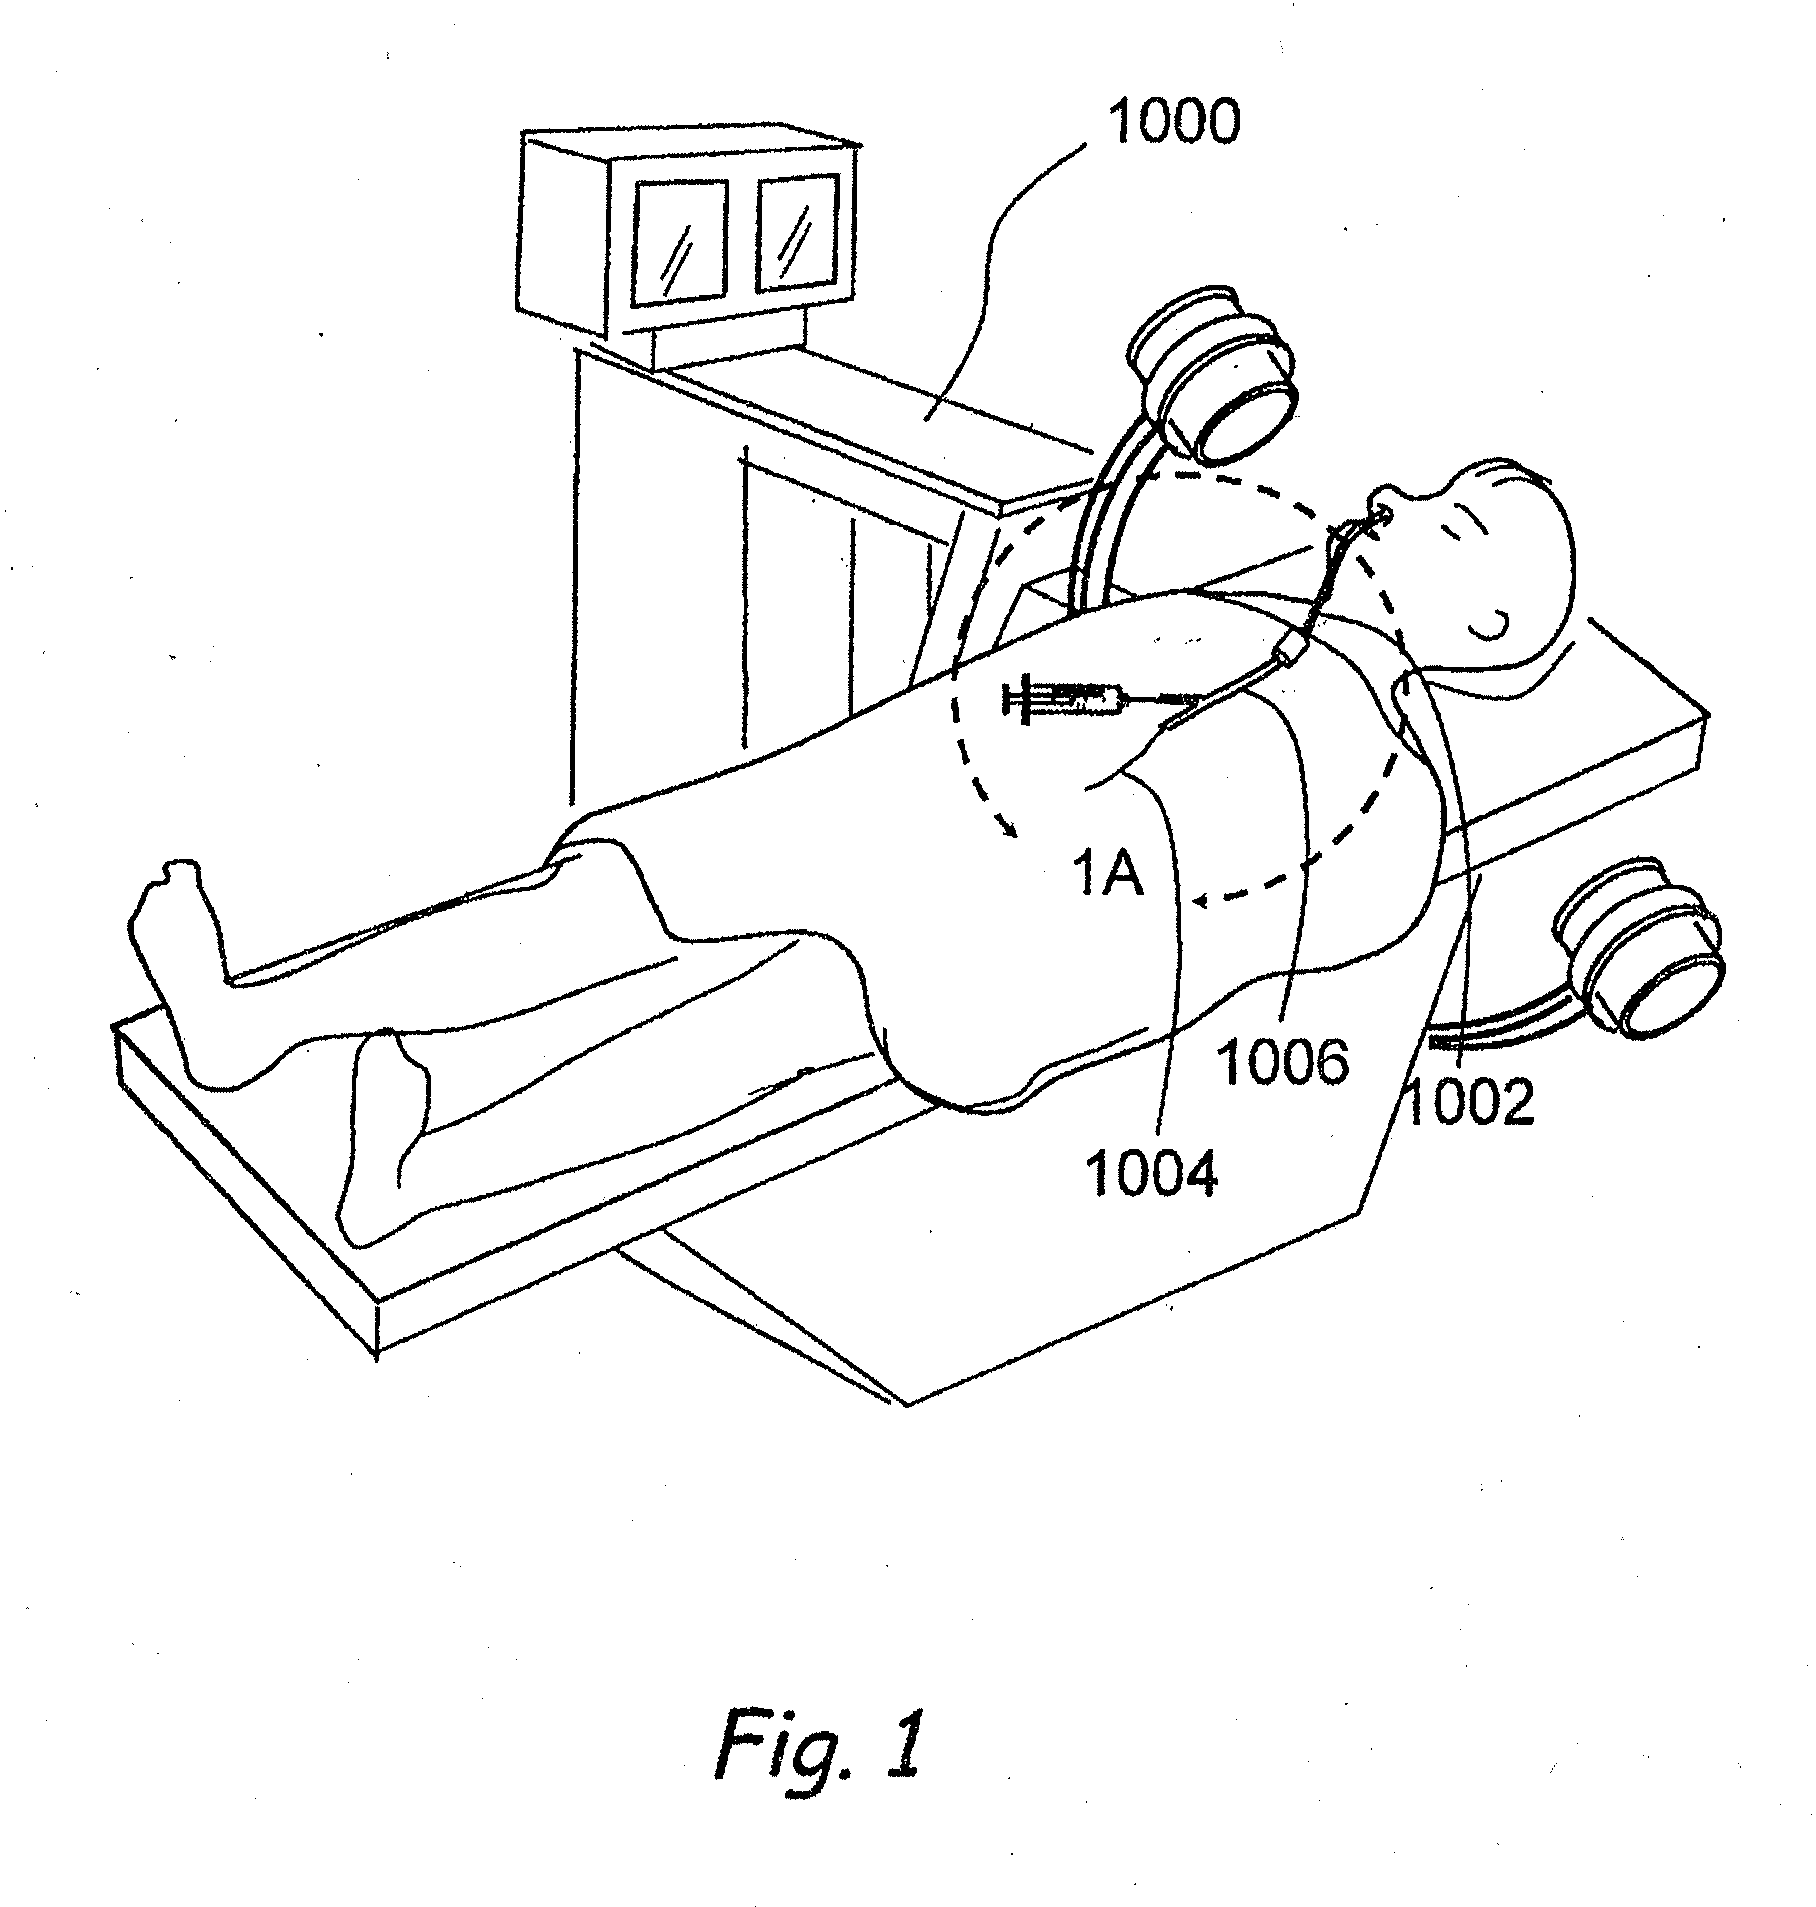 Apparatus and Methods for Dilating and Modifying Ostia of Paranasal Sinuses and Other Intranasal or Paranasal Structures